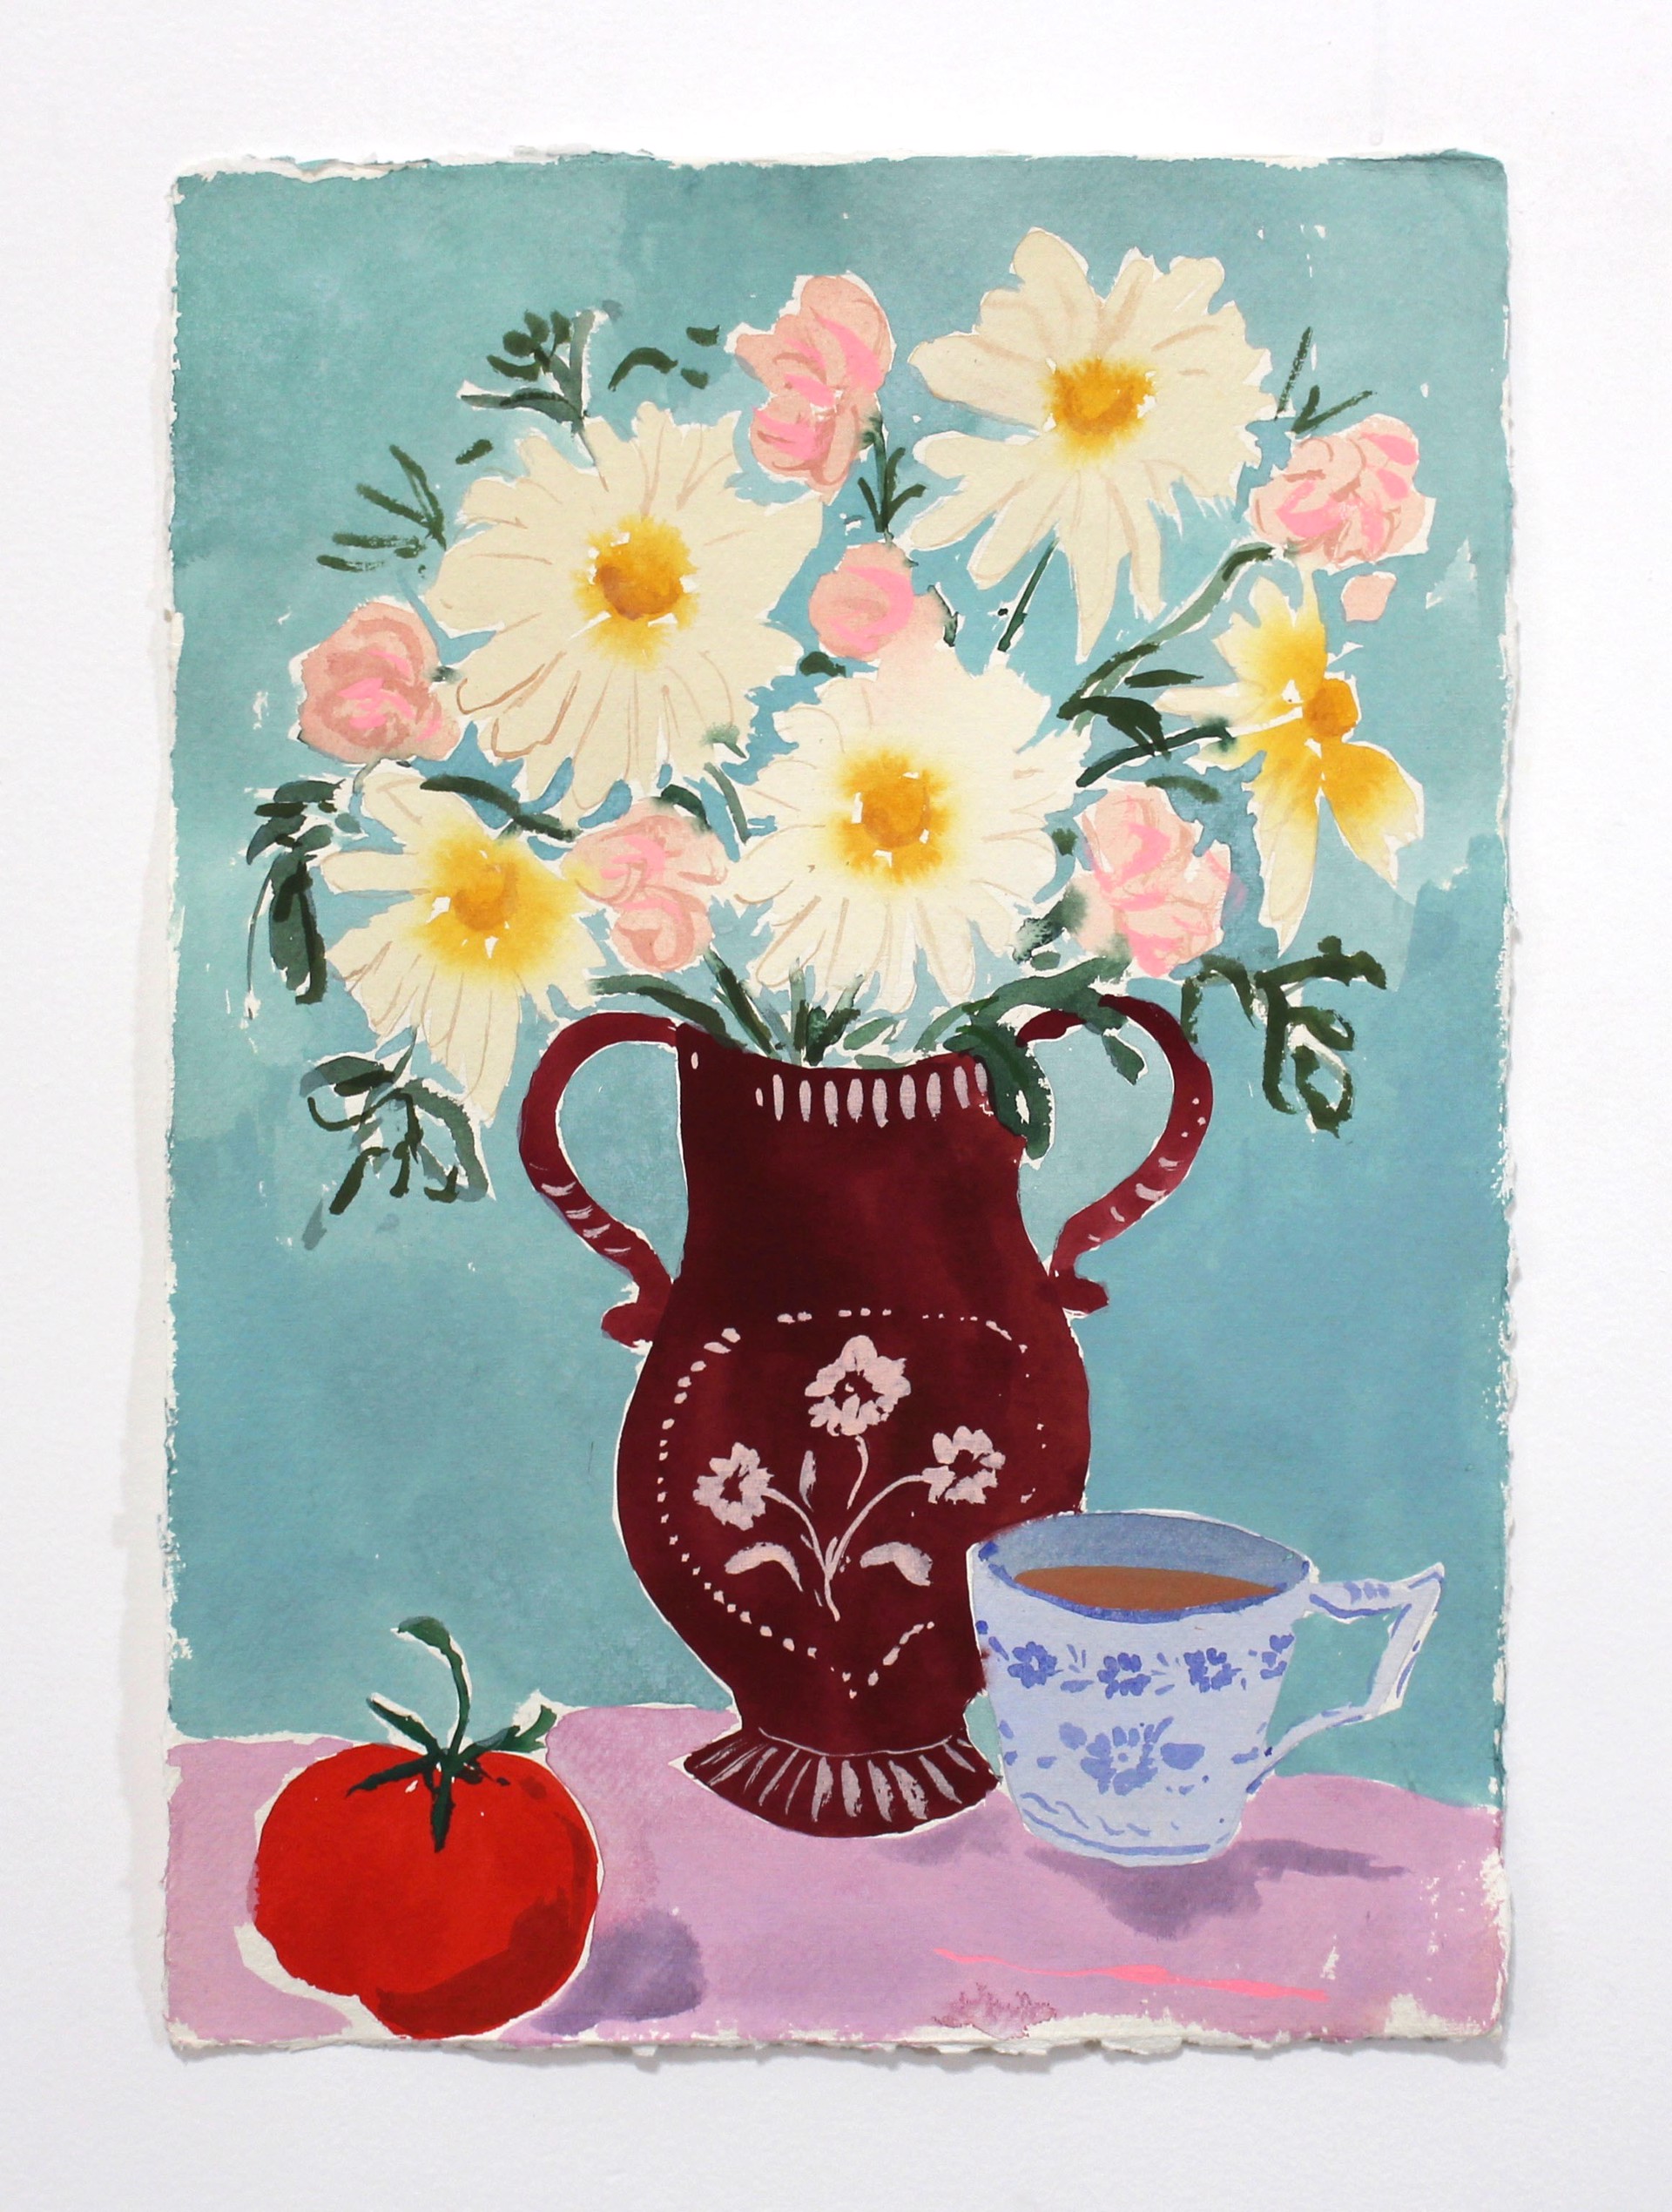 Daisies and Coffee by Kayla Plosz Antiel